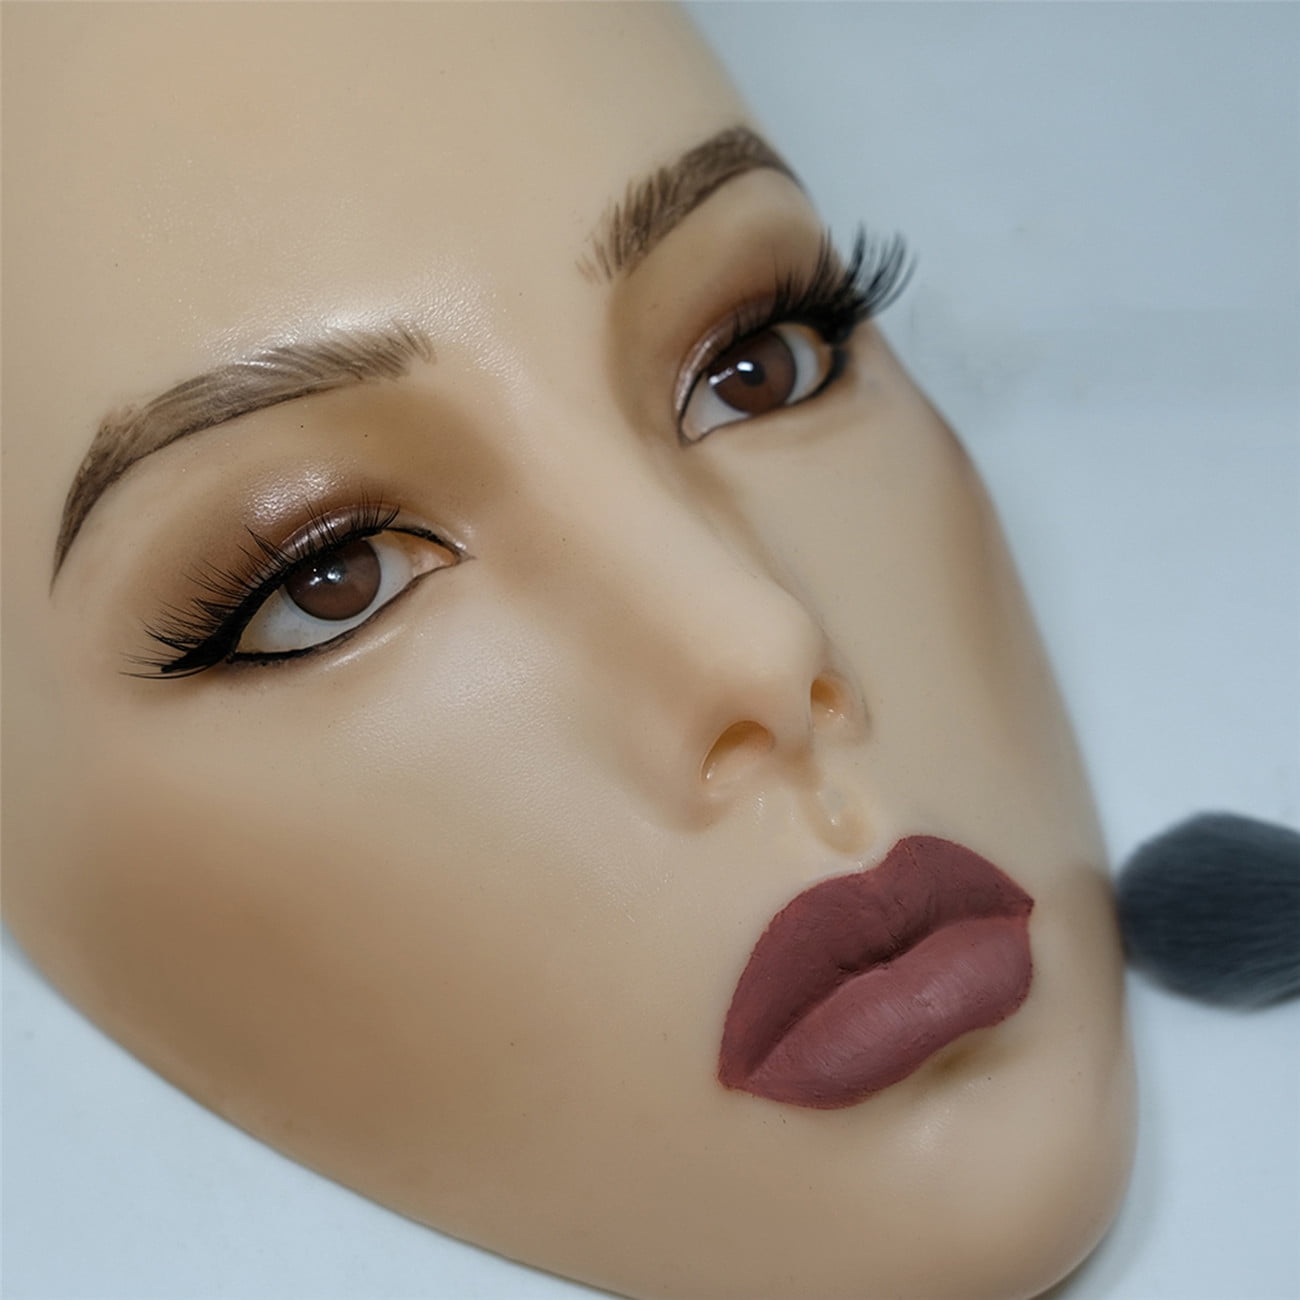  YEEFAIRY 3D Full Silicone Face for Makeup Practice